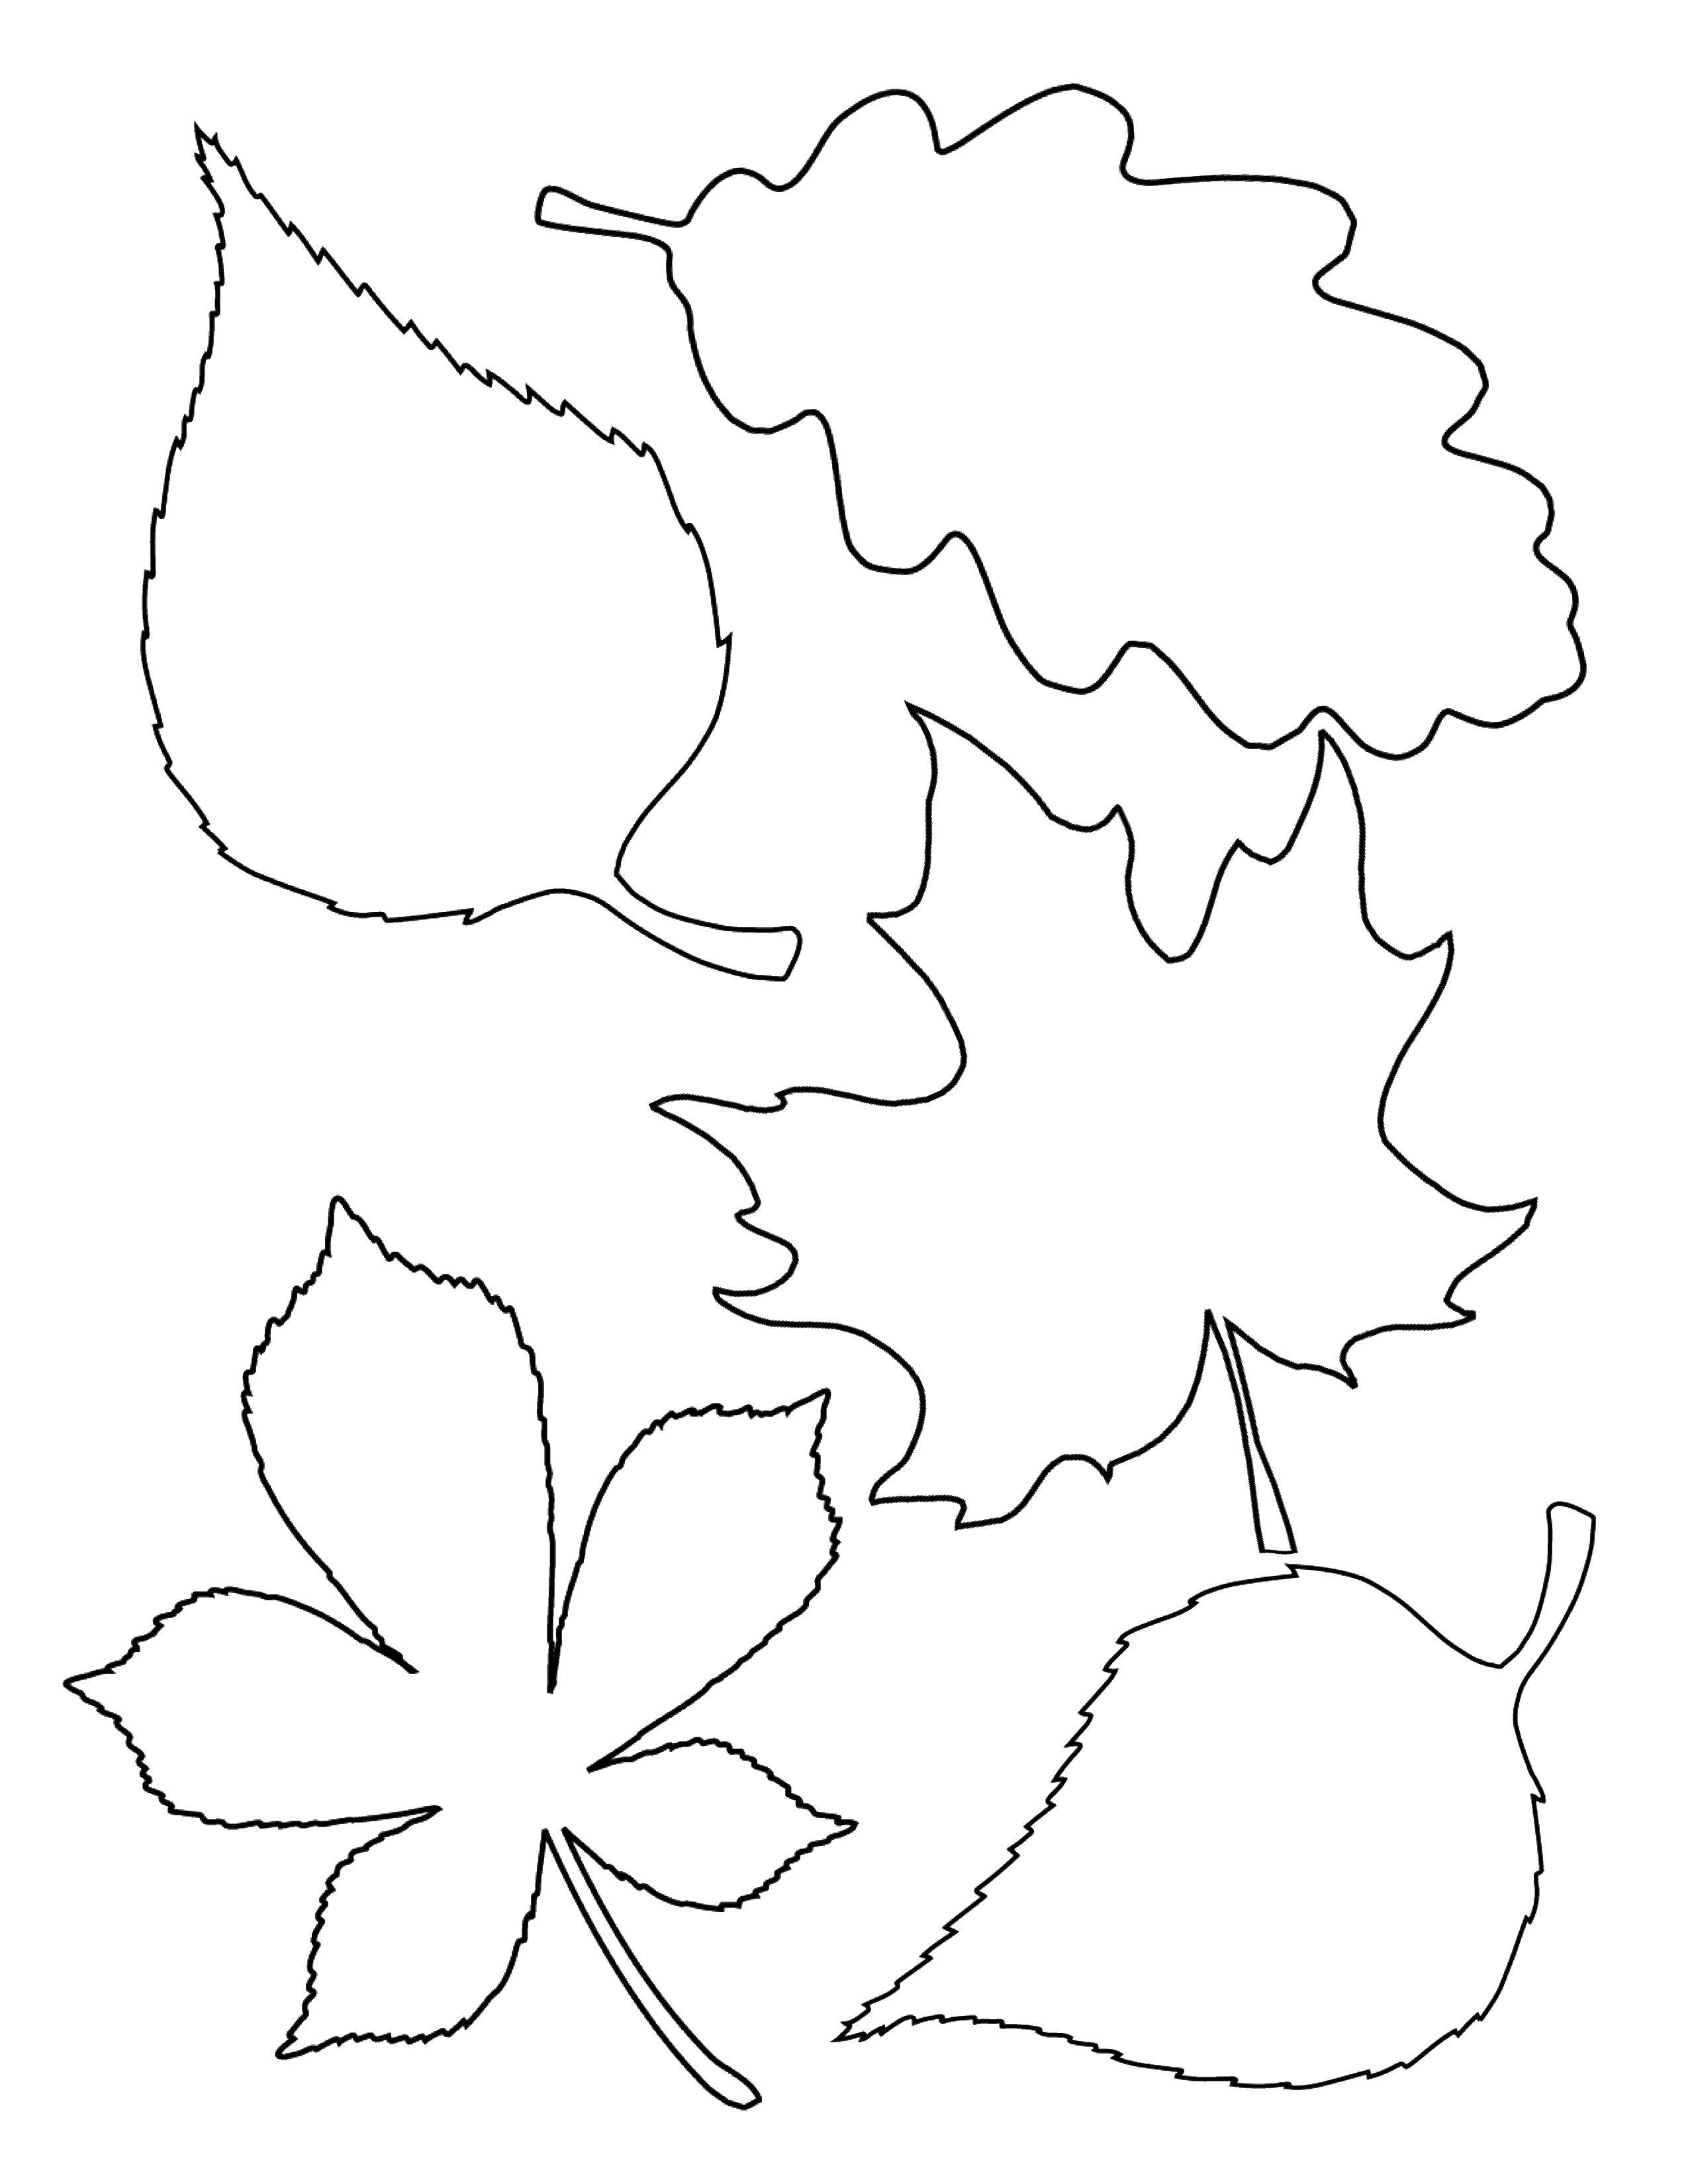 Coloring Leaves. Category The contours of the leaves of the trees. Tags:  leaves.